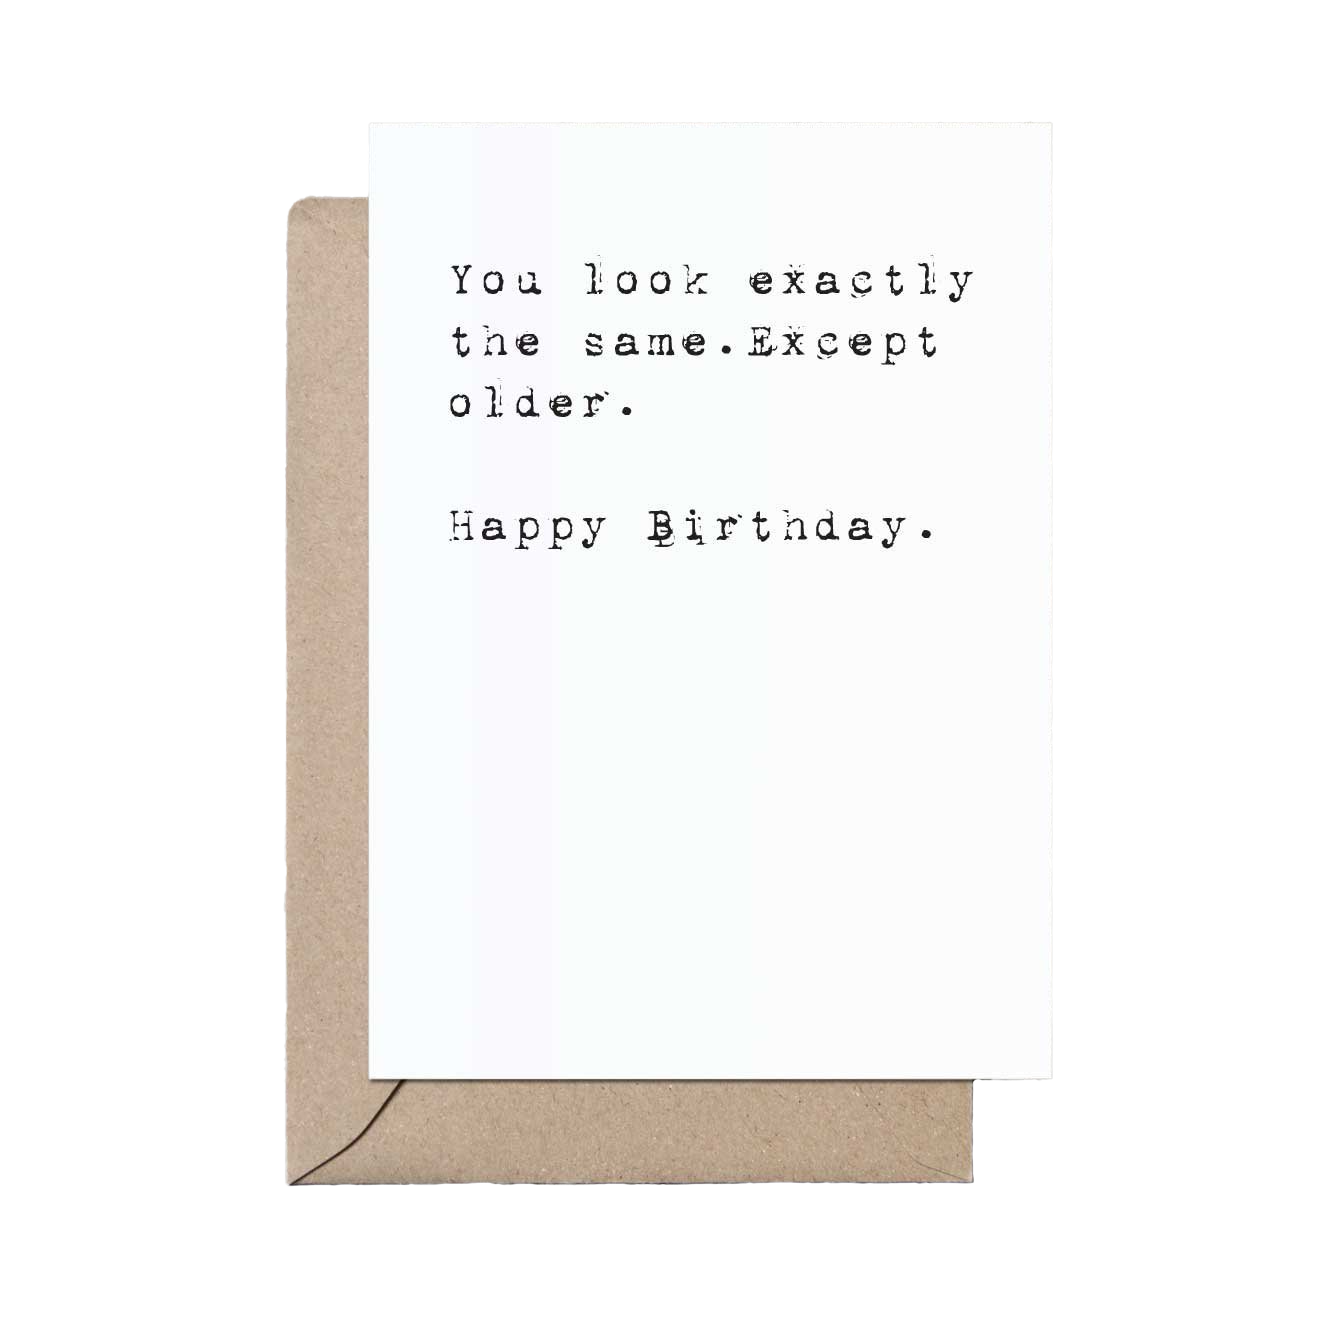 You Look Exactly the Same Except Older Birthday Card